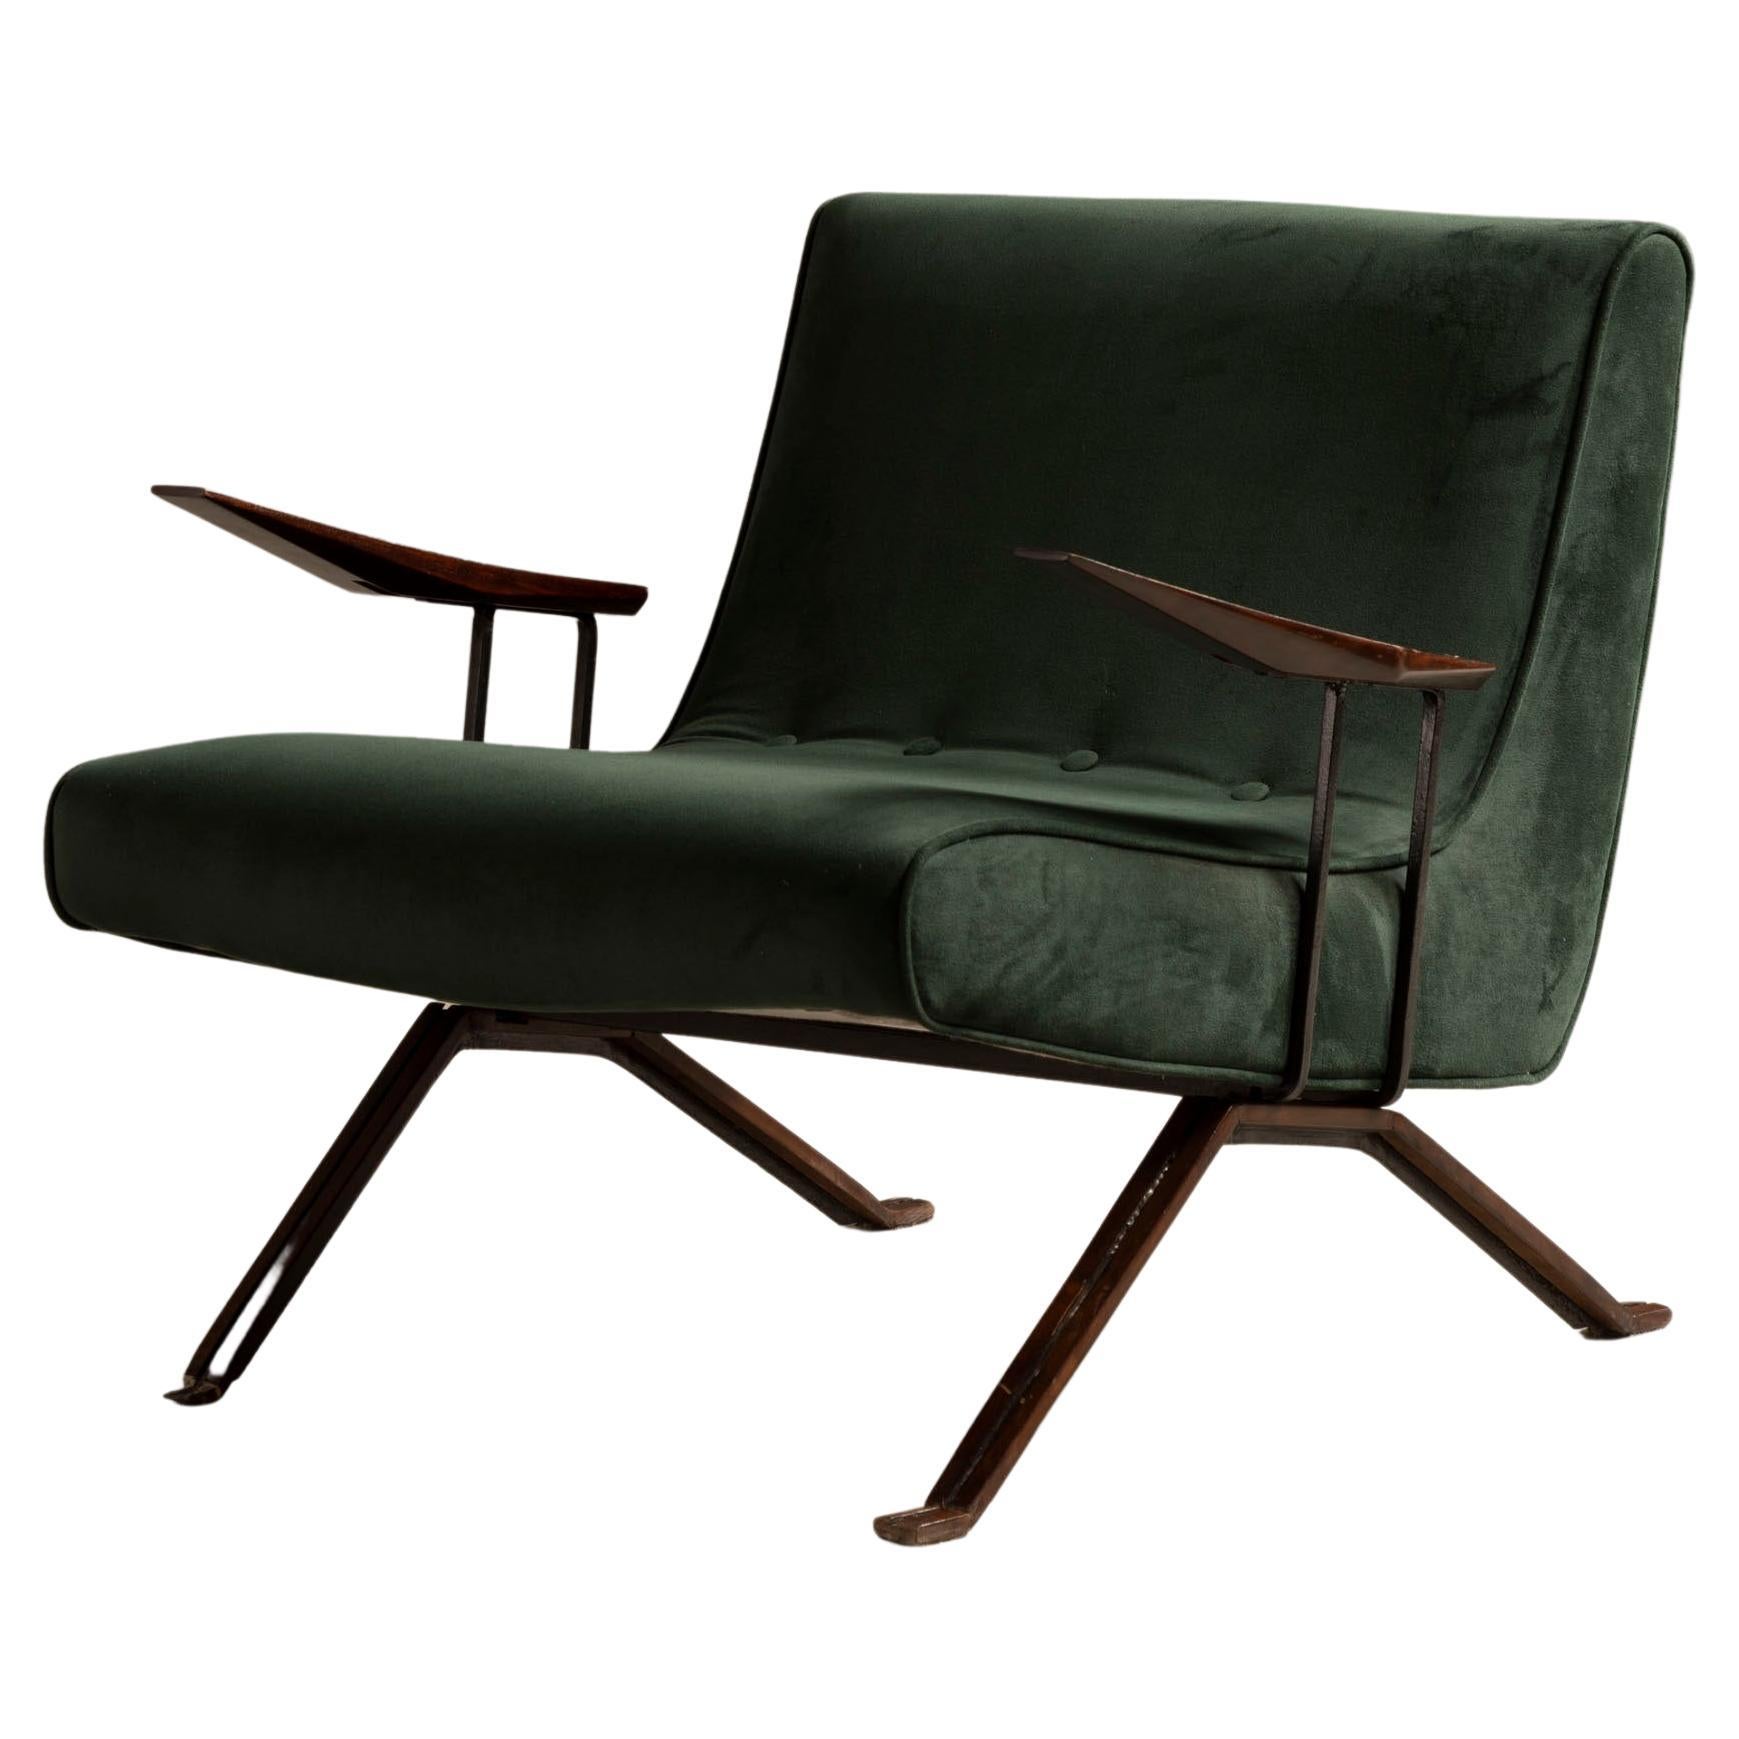 Pair of Rare "MP-01" Armchair, by Percival Lafer, Brazilian Mid-Century Modern For Sale